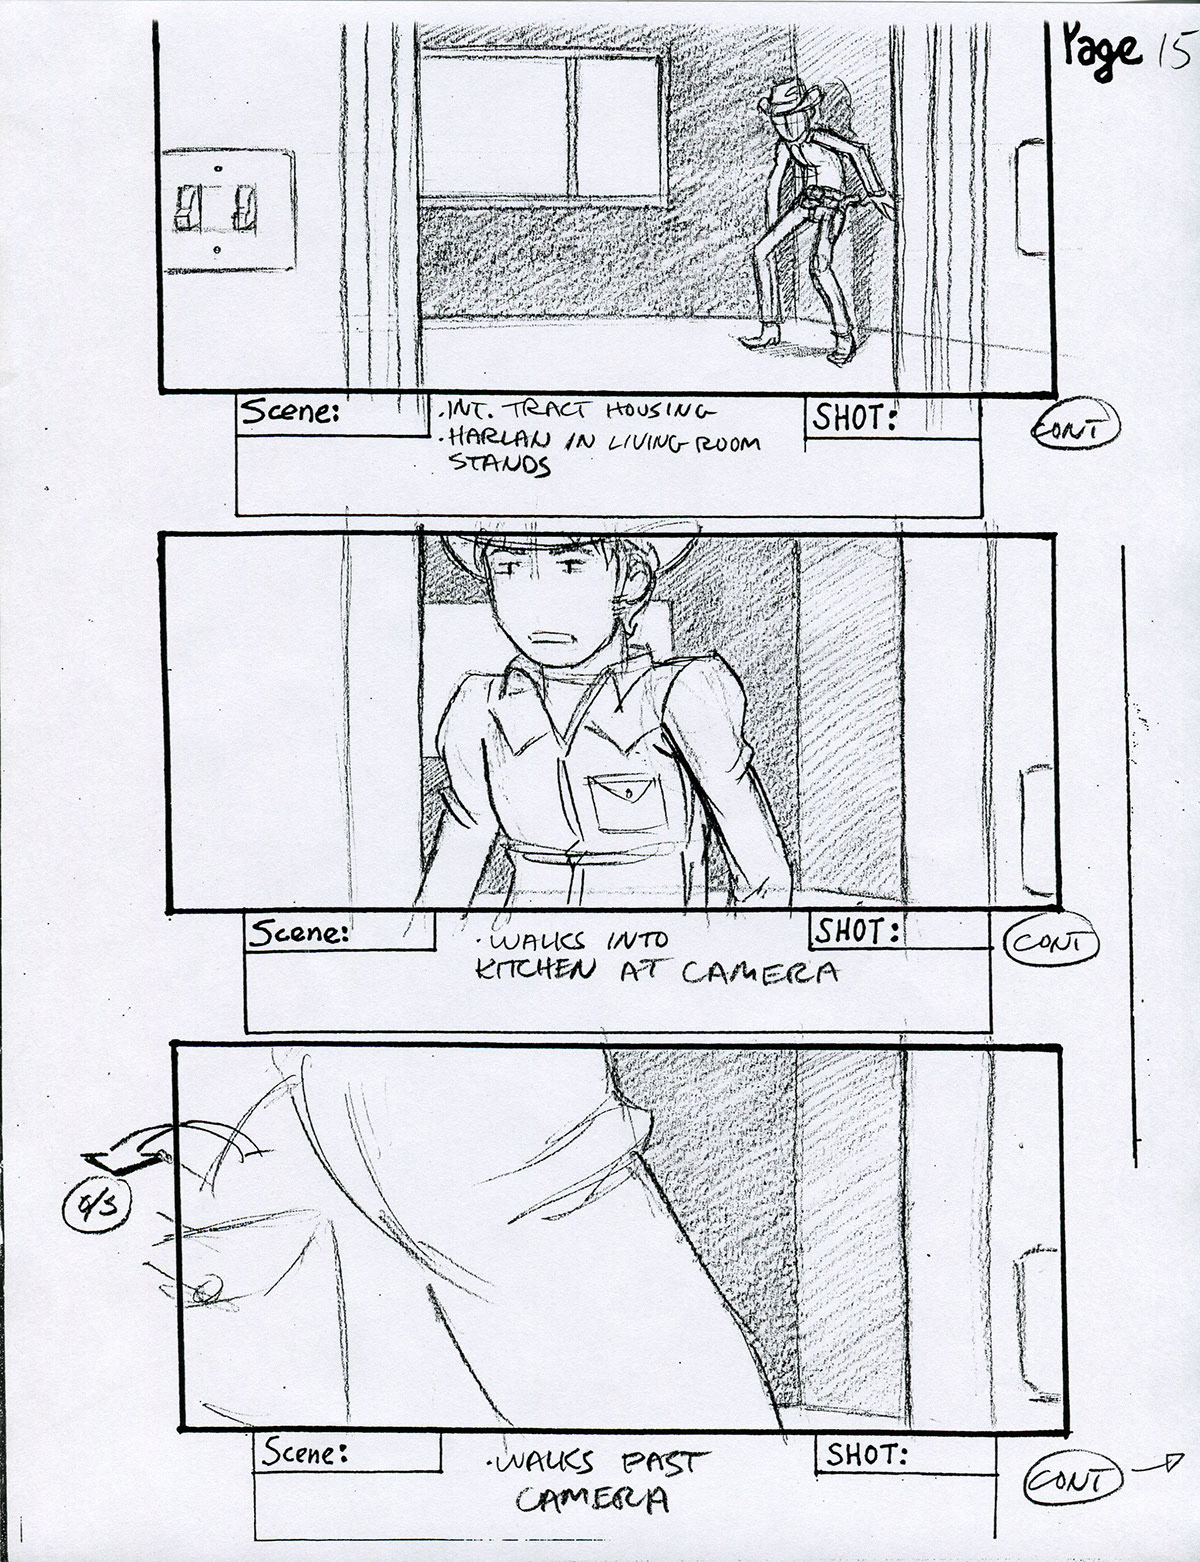 Storyboards live action Film  